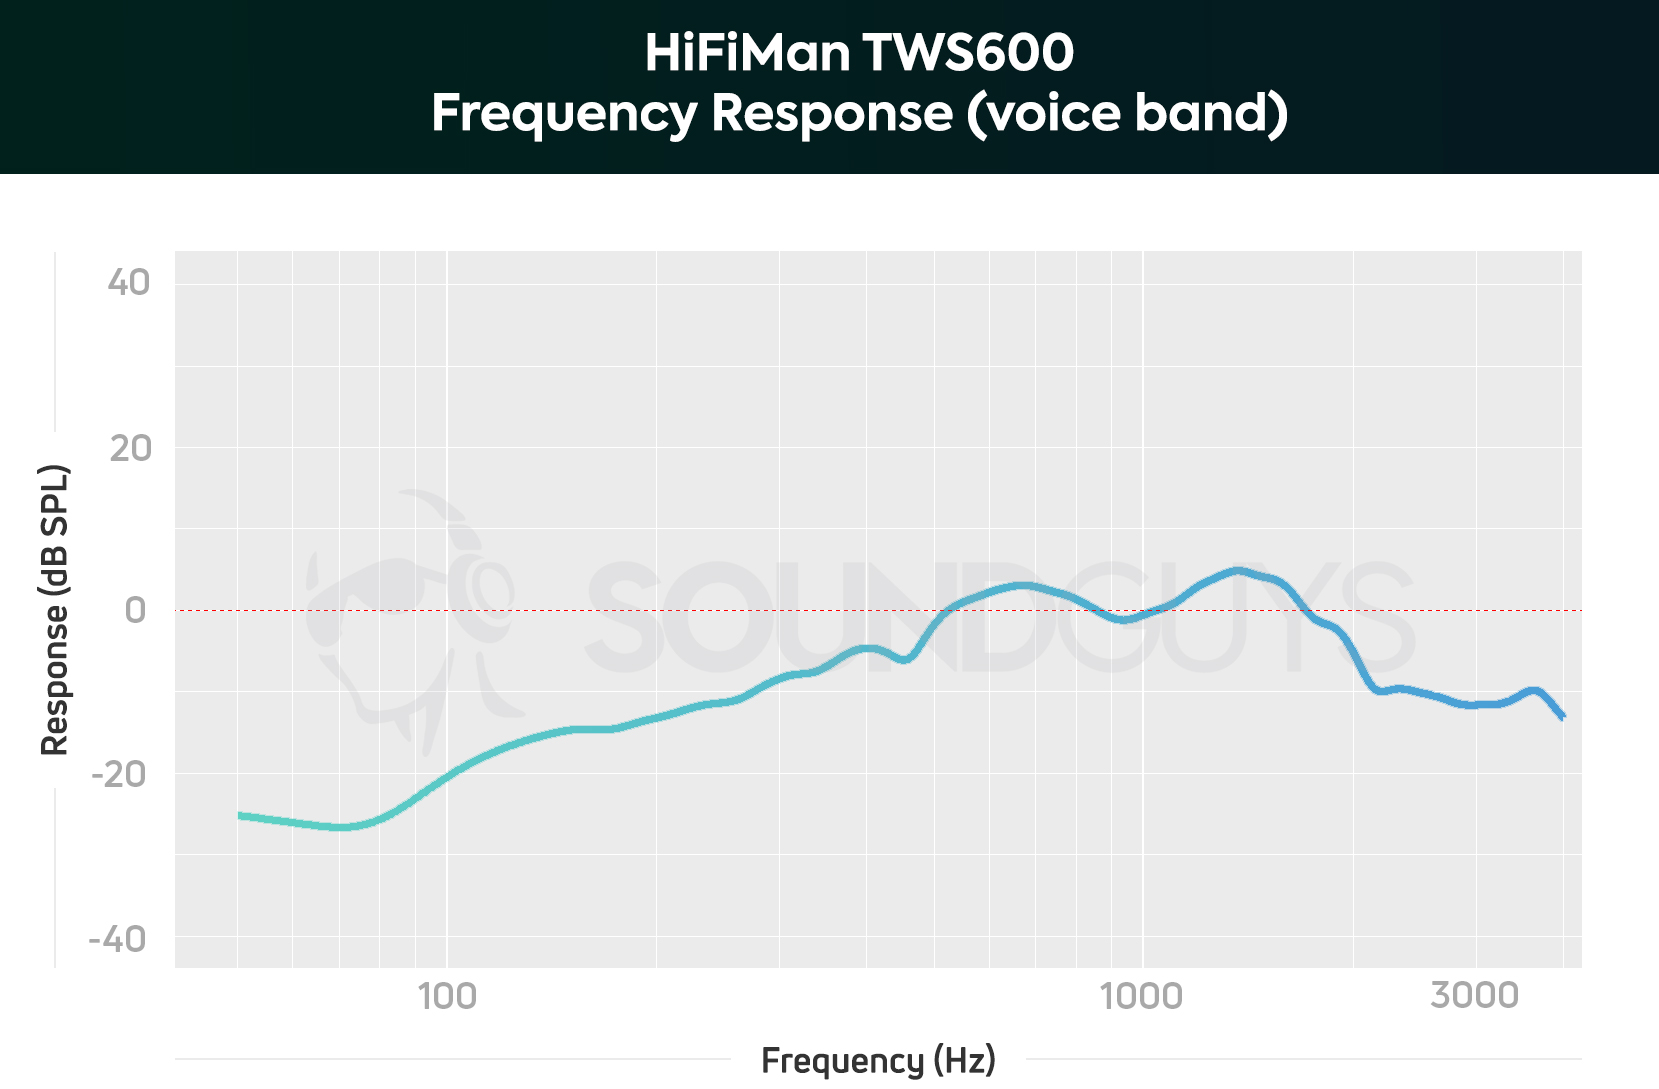 A chart depicting the HiFiMan TWS600 microphone frequency response which is limited to the human voice band with 20-500Hz frequencies de-emphasized.